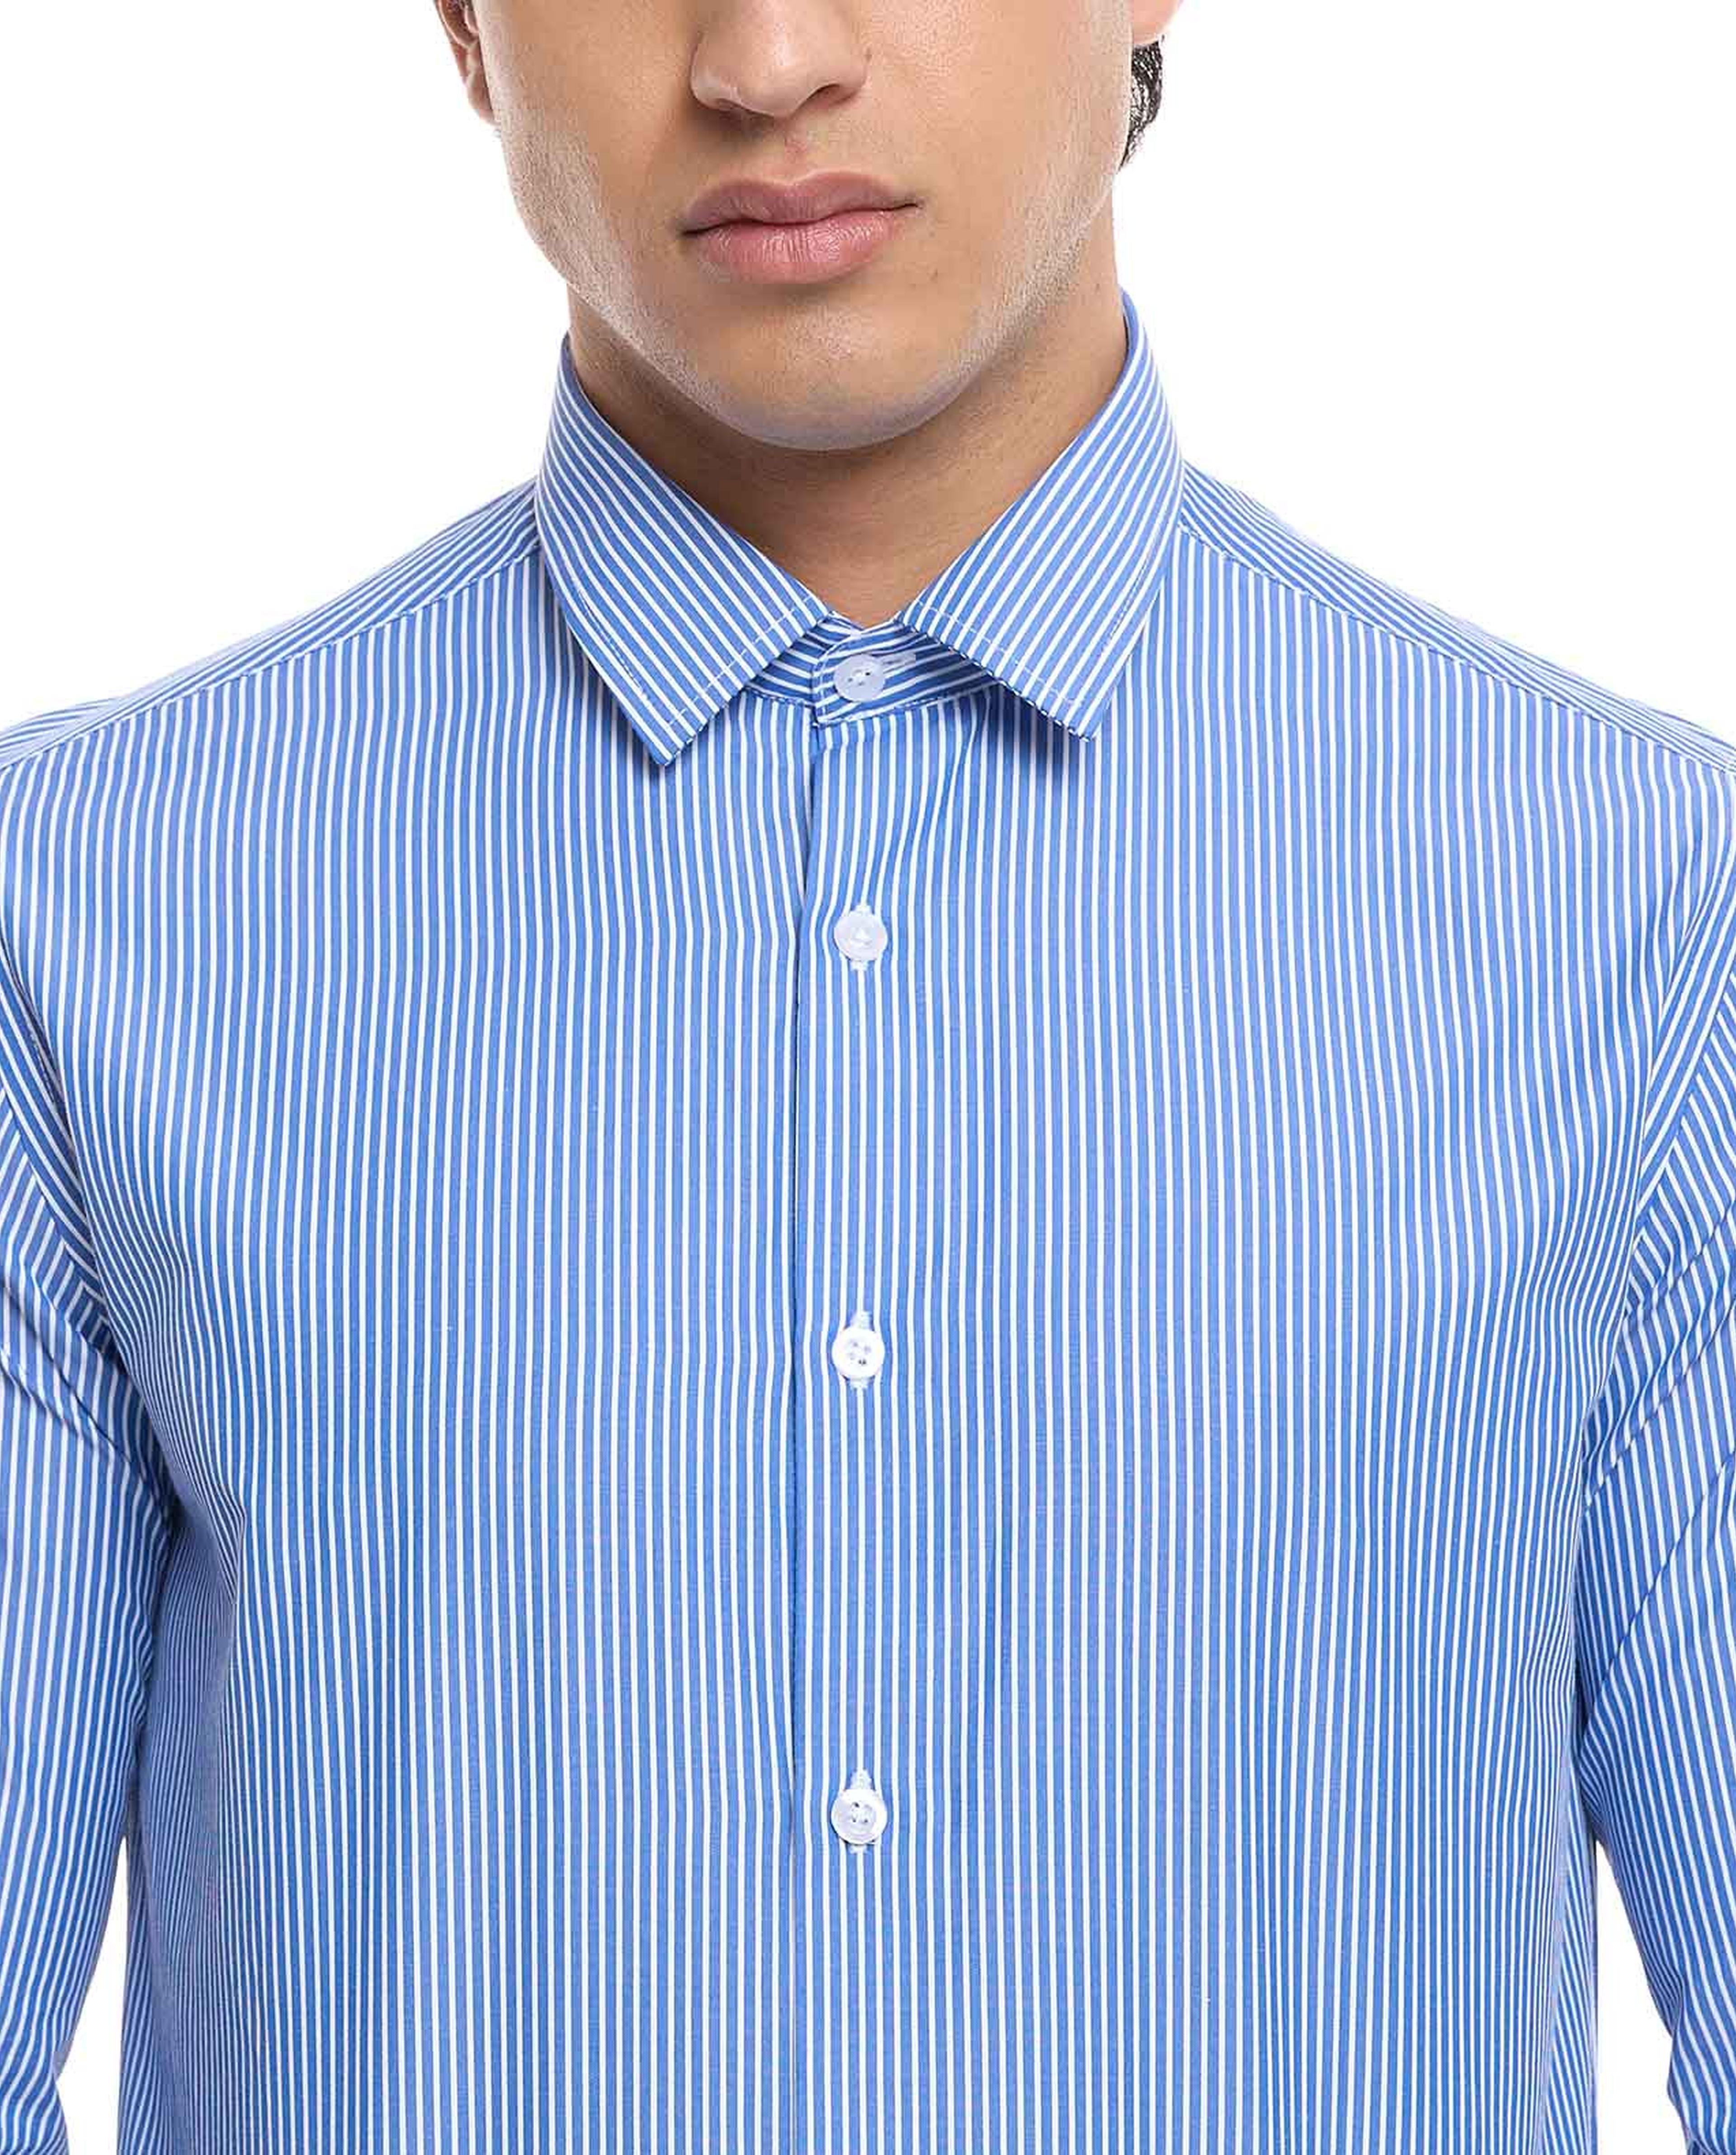 Striped Shirt with Spread Collar and Long Sleeves